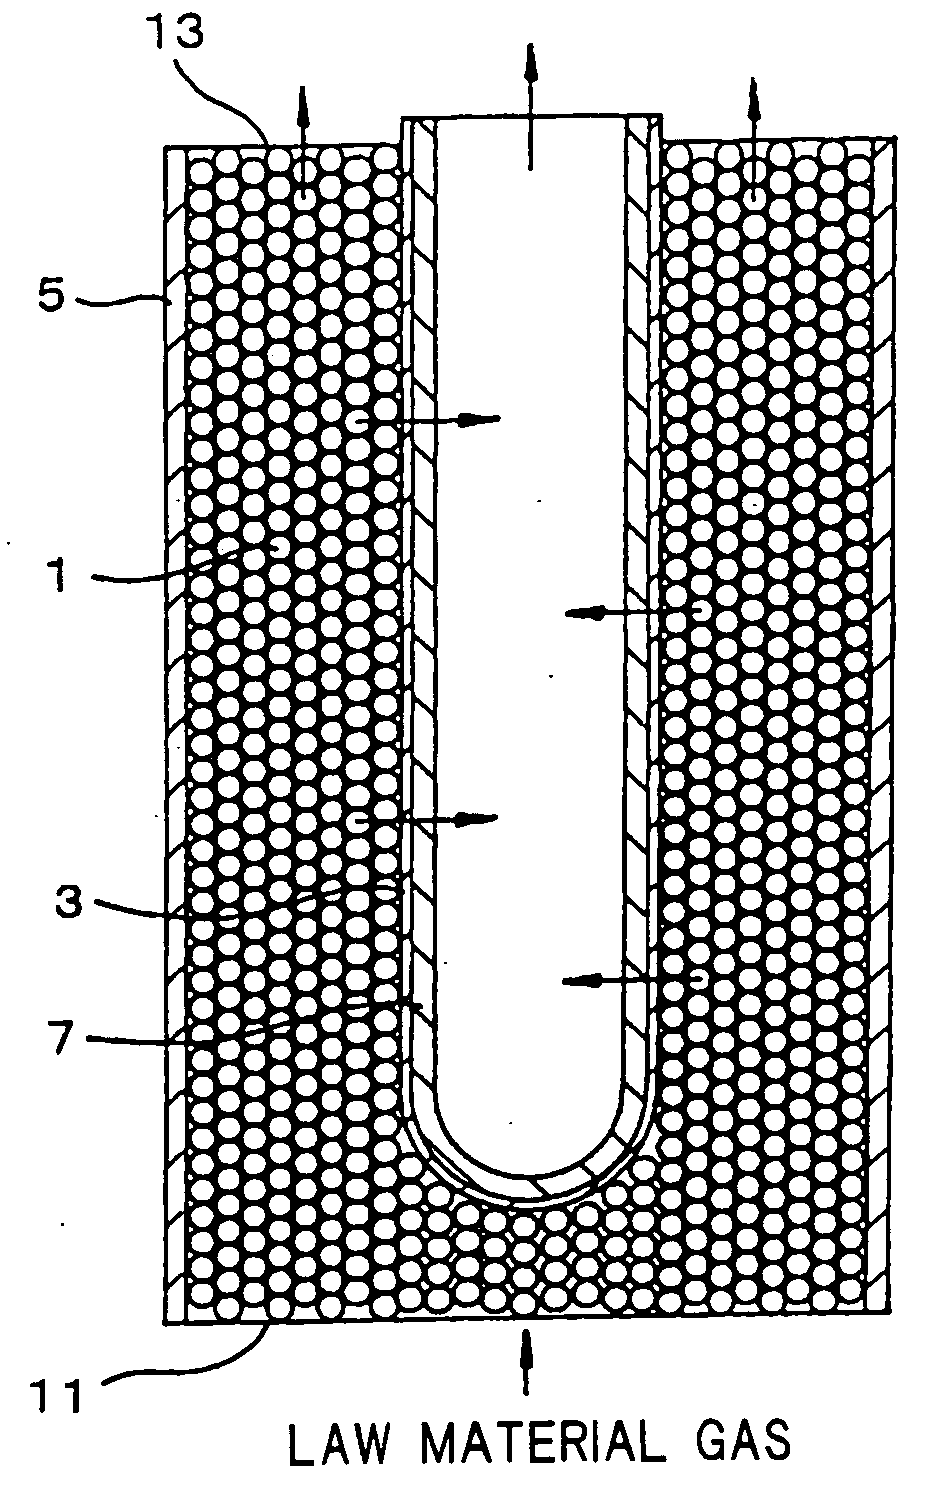 Process for reforming hydrocarbons with carbon dioxide by the use of a selectively permeable membrane reactor